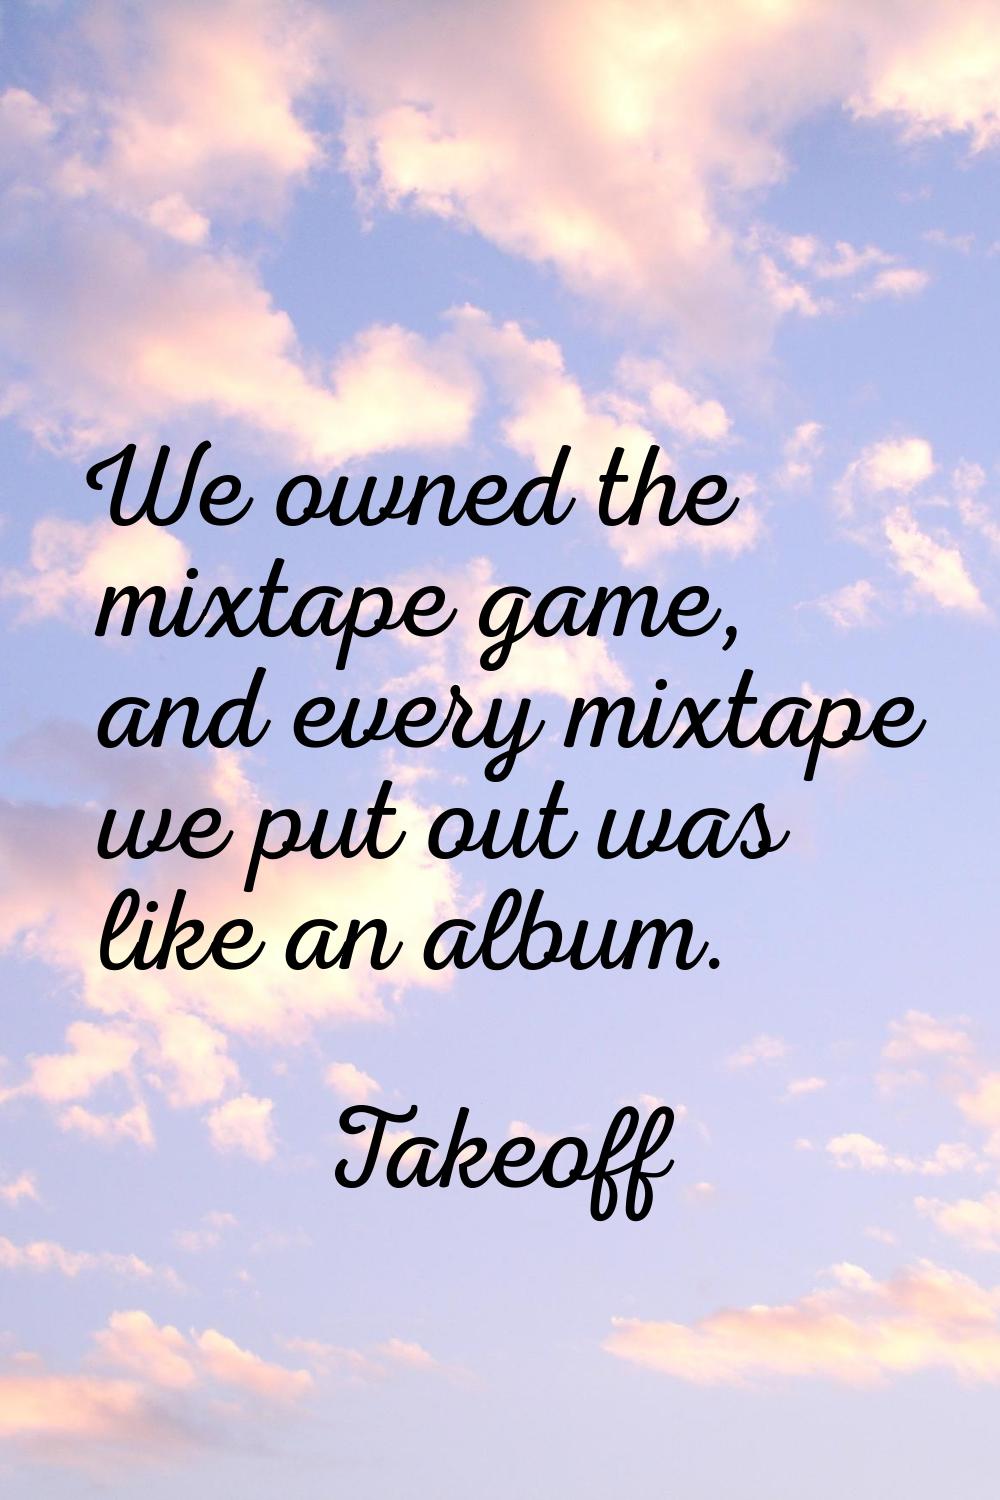 We owned the mixtape game, and every mixtape we put out was like an album.